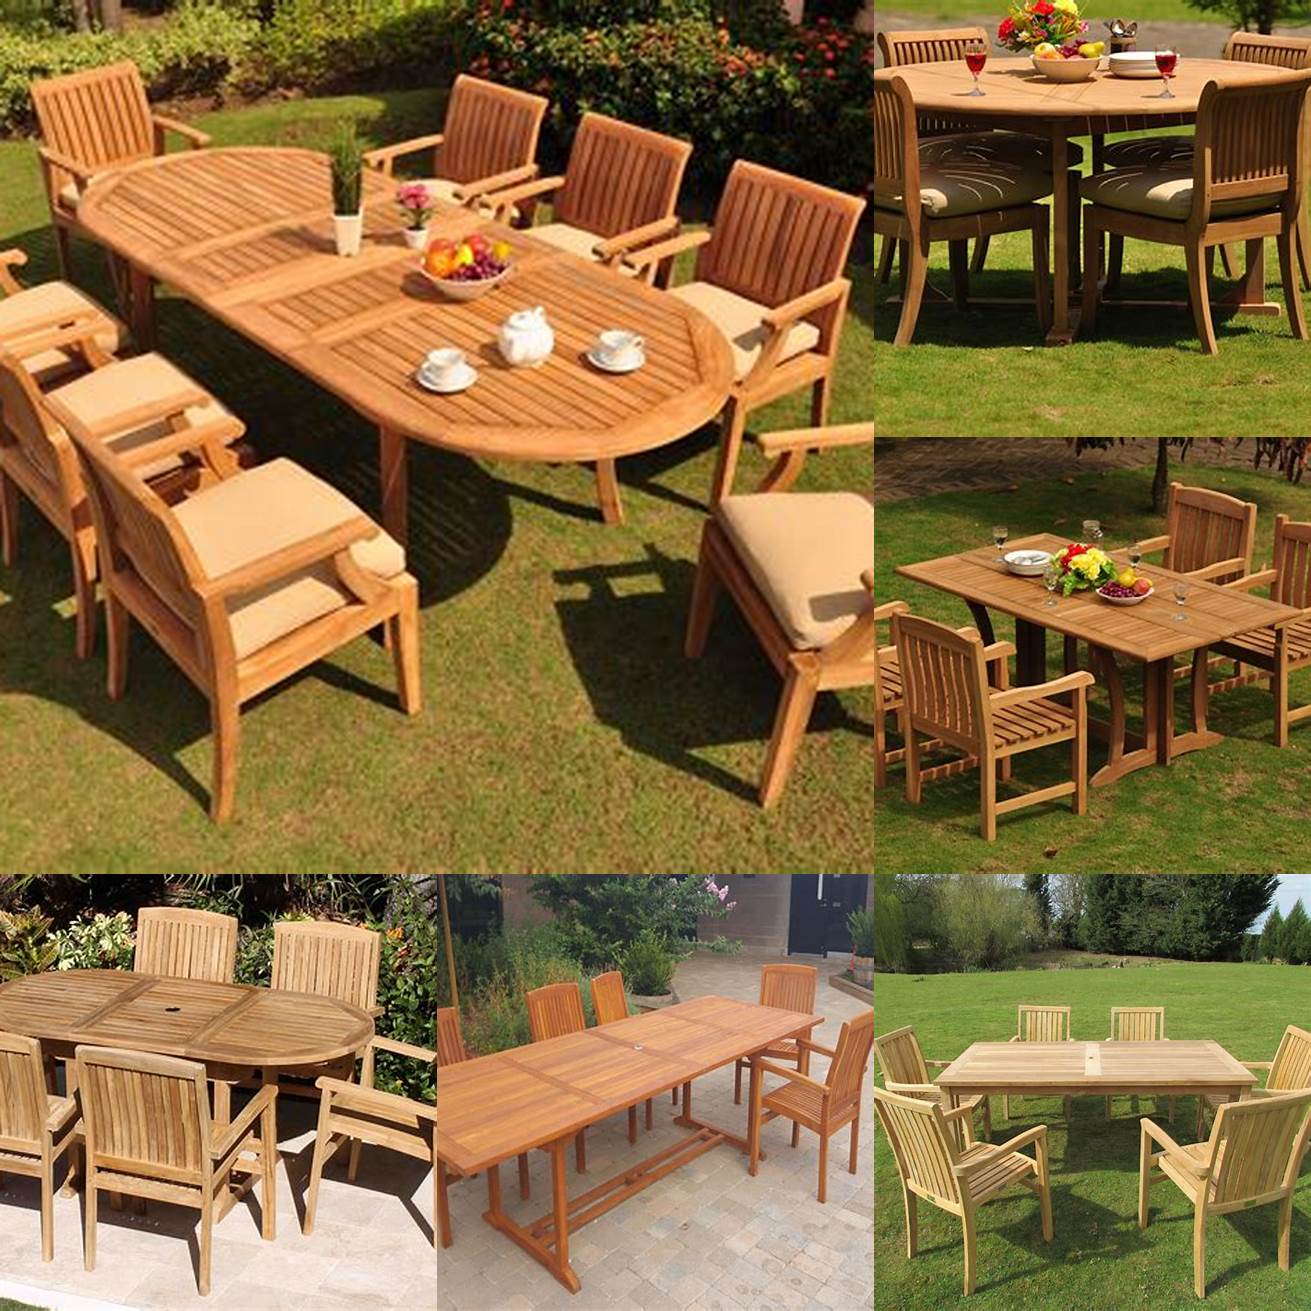 Teak chairs and tables